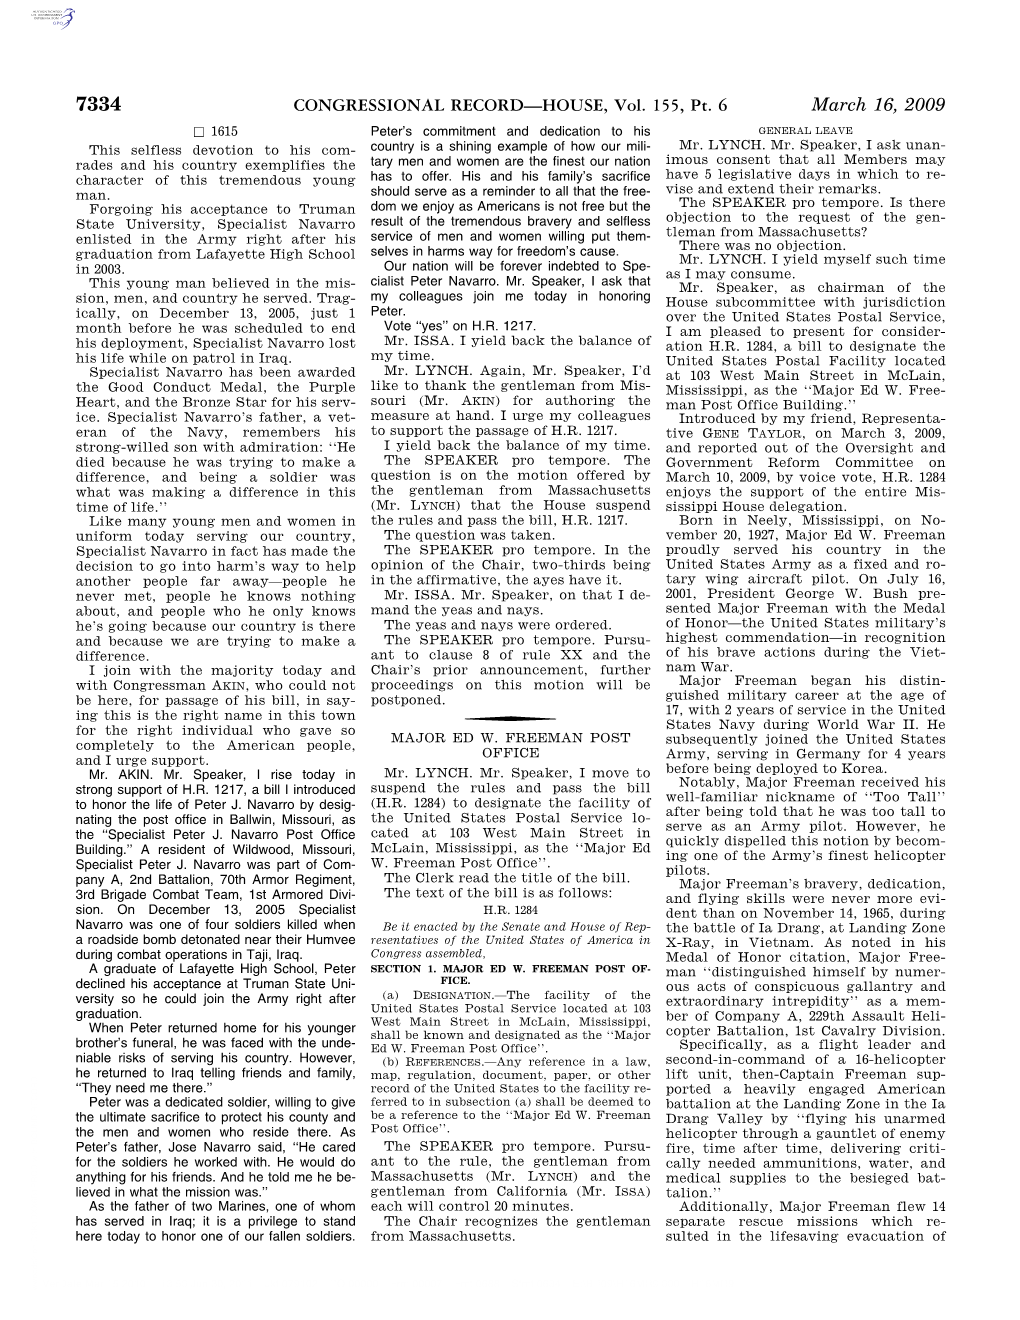 CONGRESSIONAL RECORD—HOUSE, Vol. 155, Pt. 6 March 16